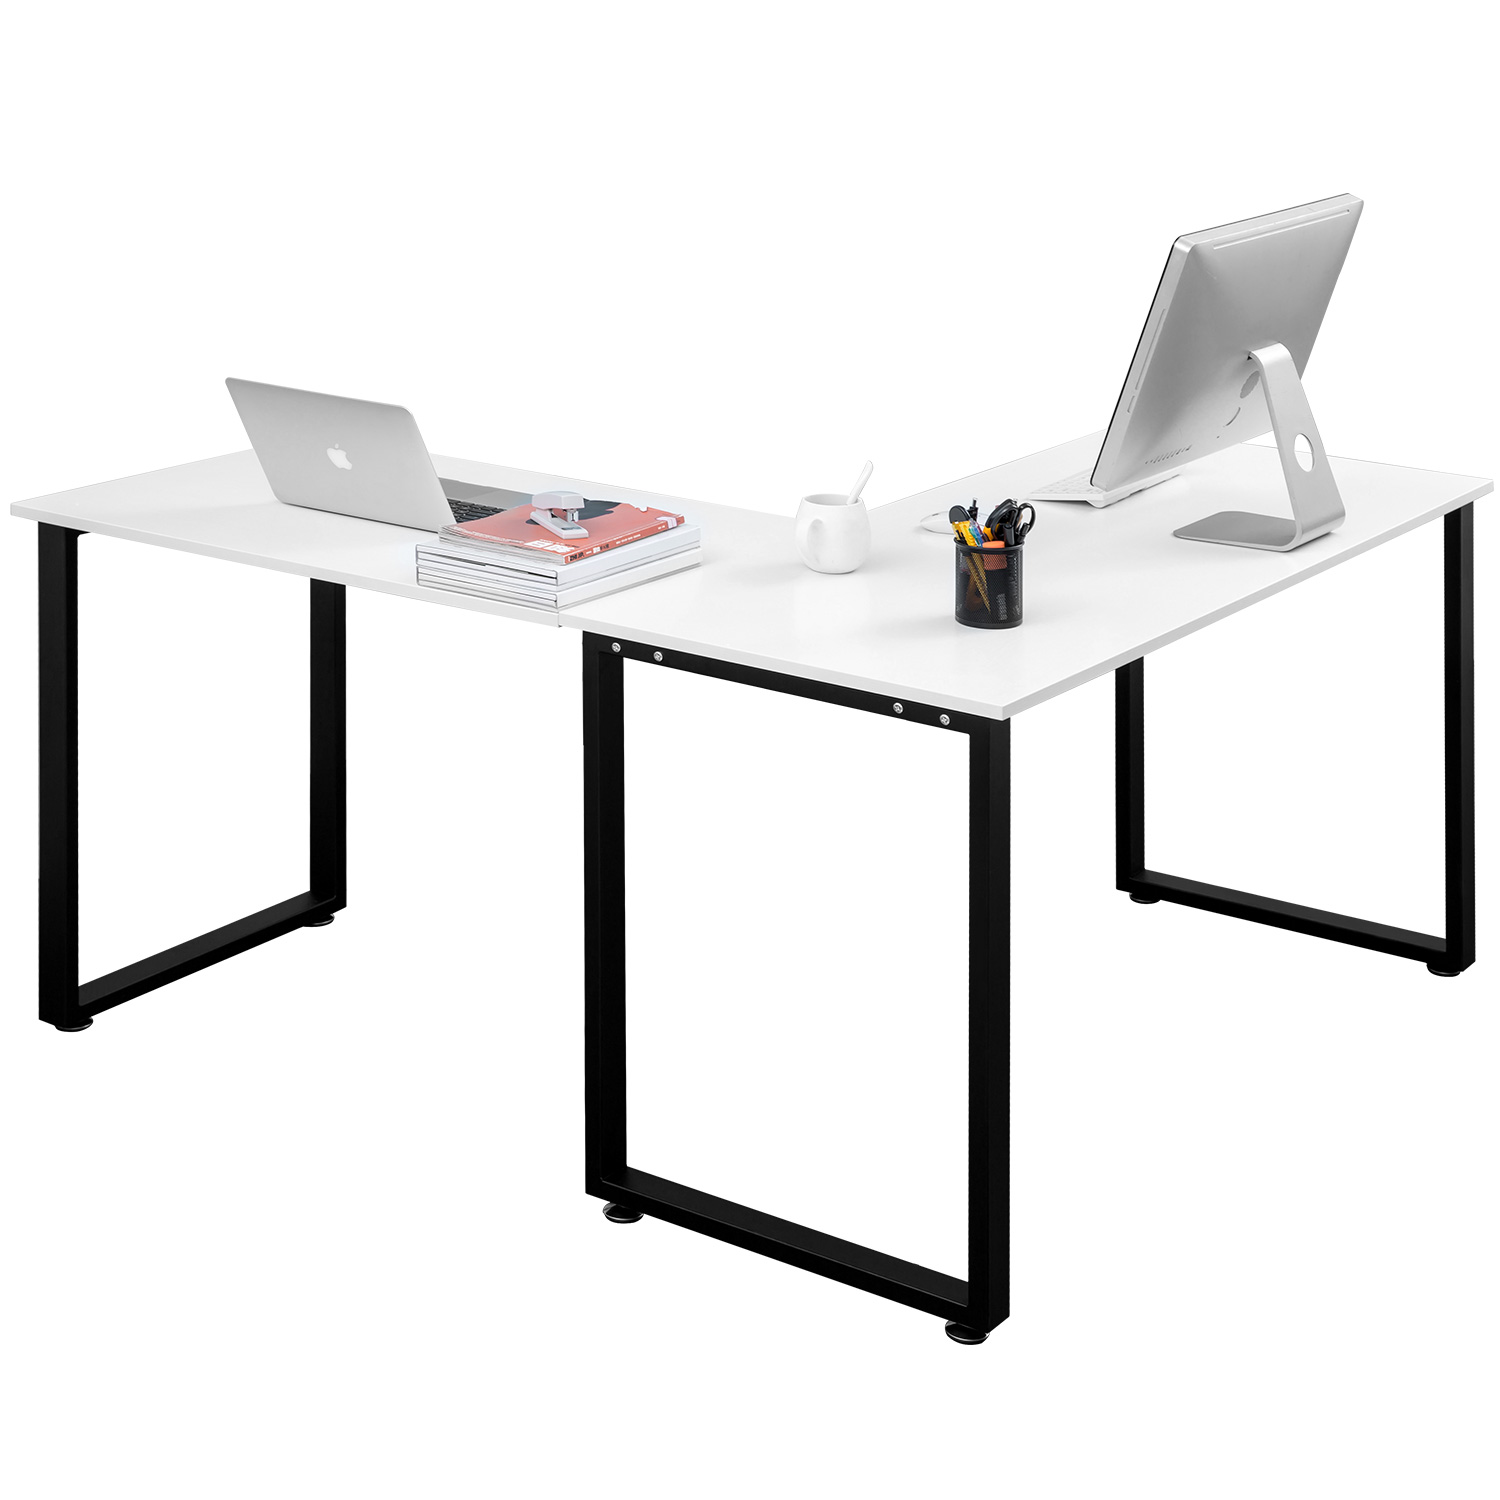 enyopro Home Office Computer Desk, 58’’ L-Shaped Corner Desk with 0.7" Thicker Tabletop, Space-Saving Workstation Table for Office Home Apartment, Sturdy Metal Frame Corner Gaming Study Table, B2257 - image 3 of 8